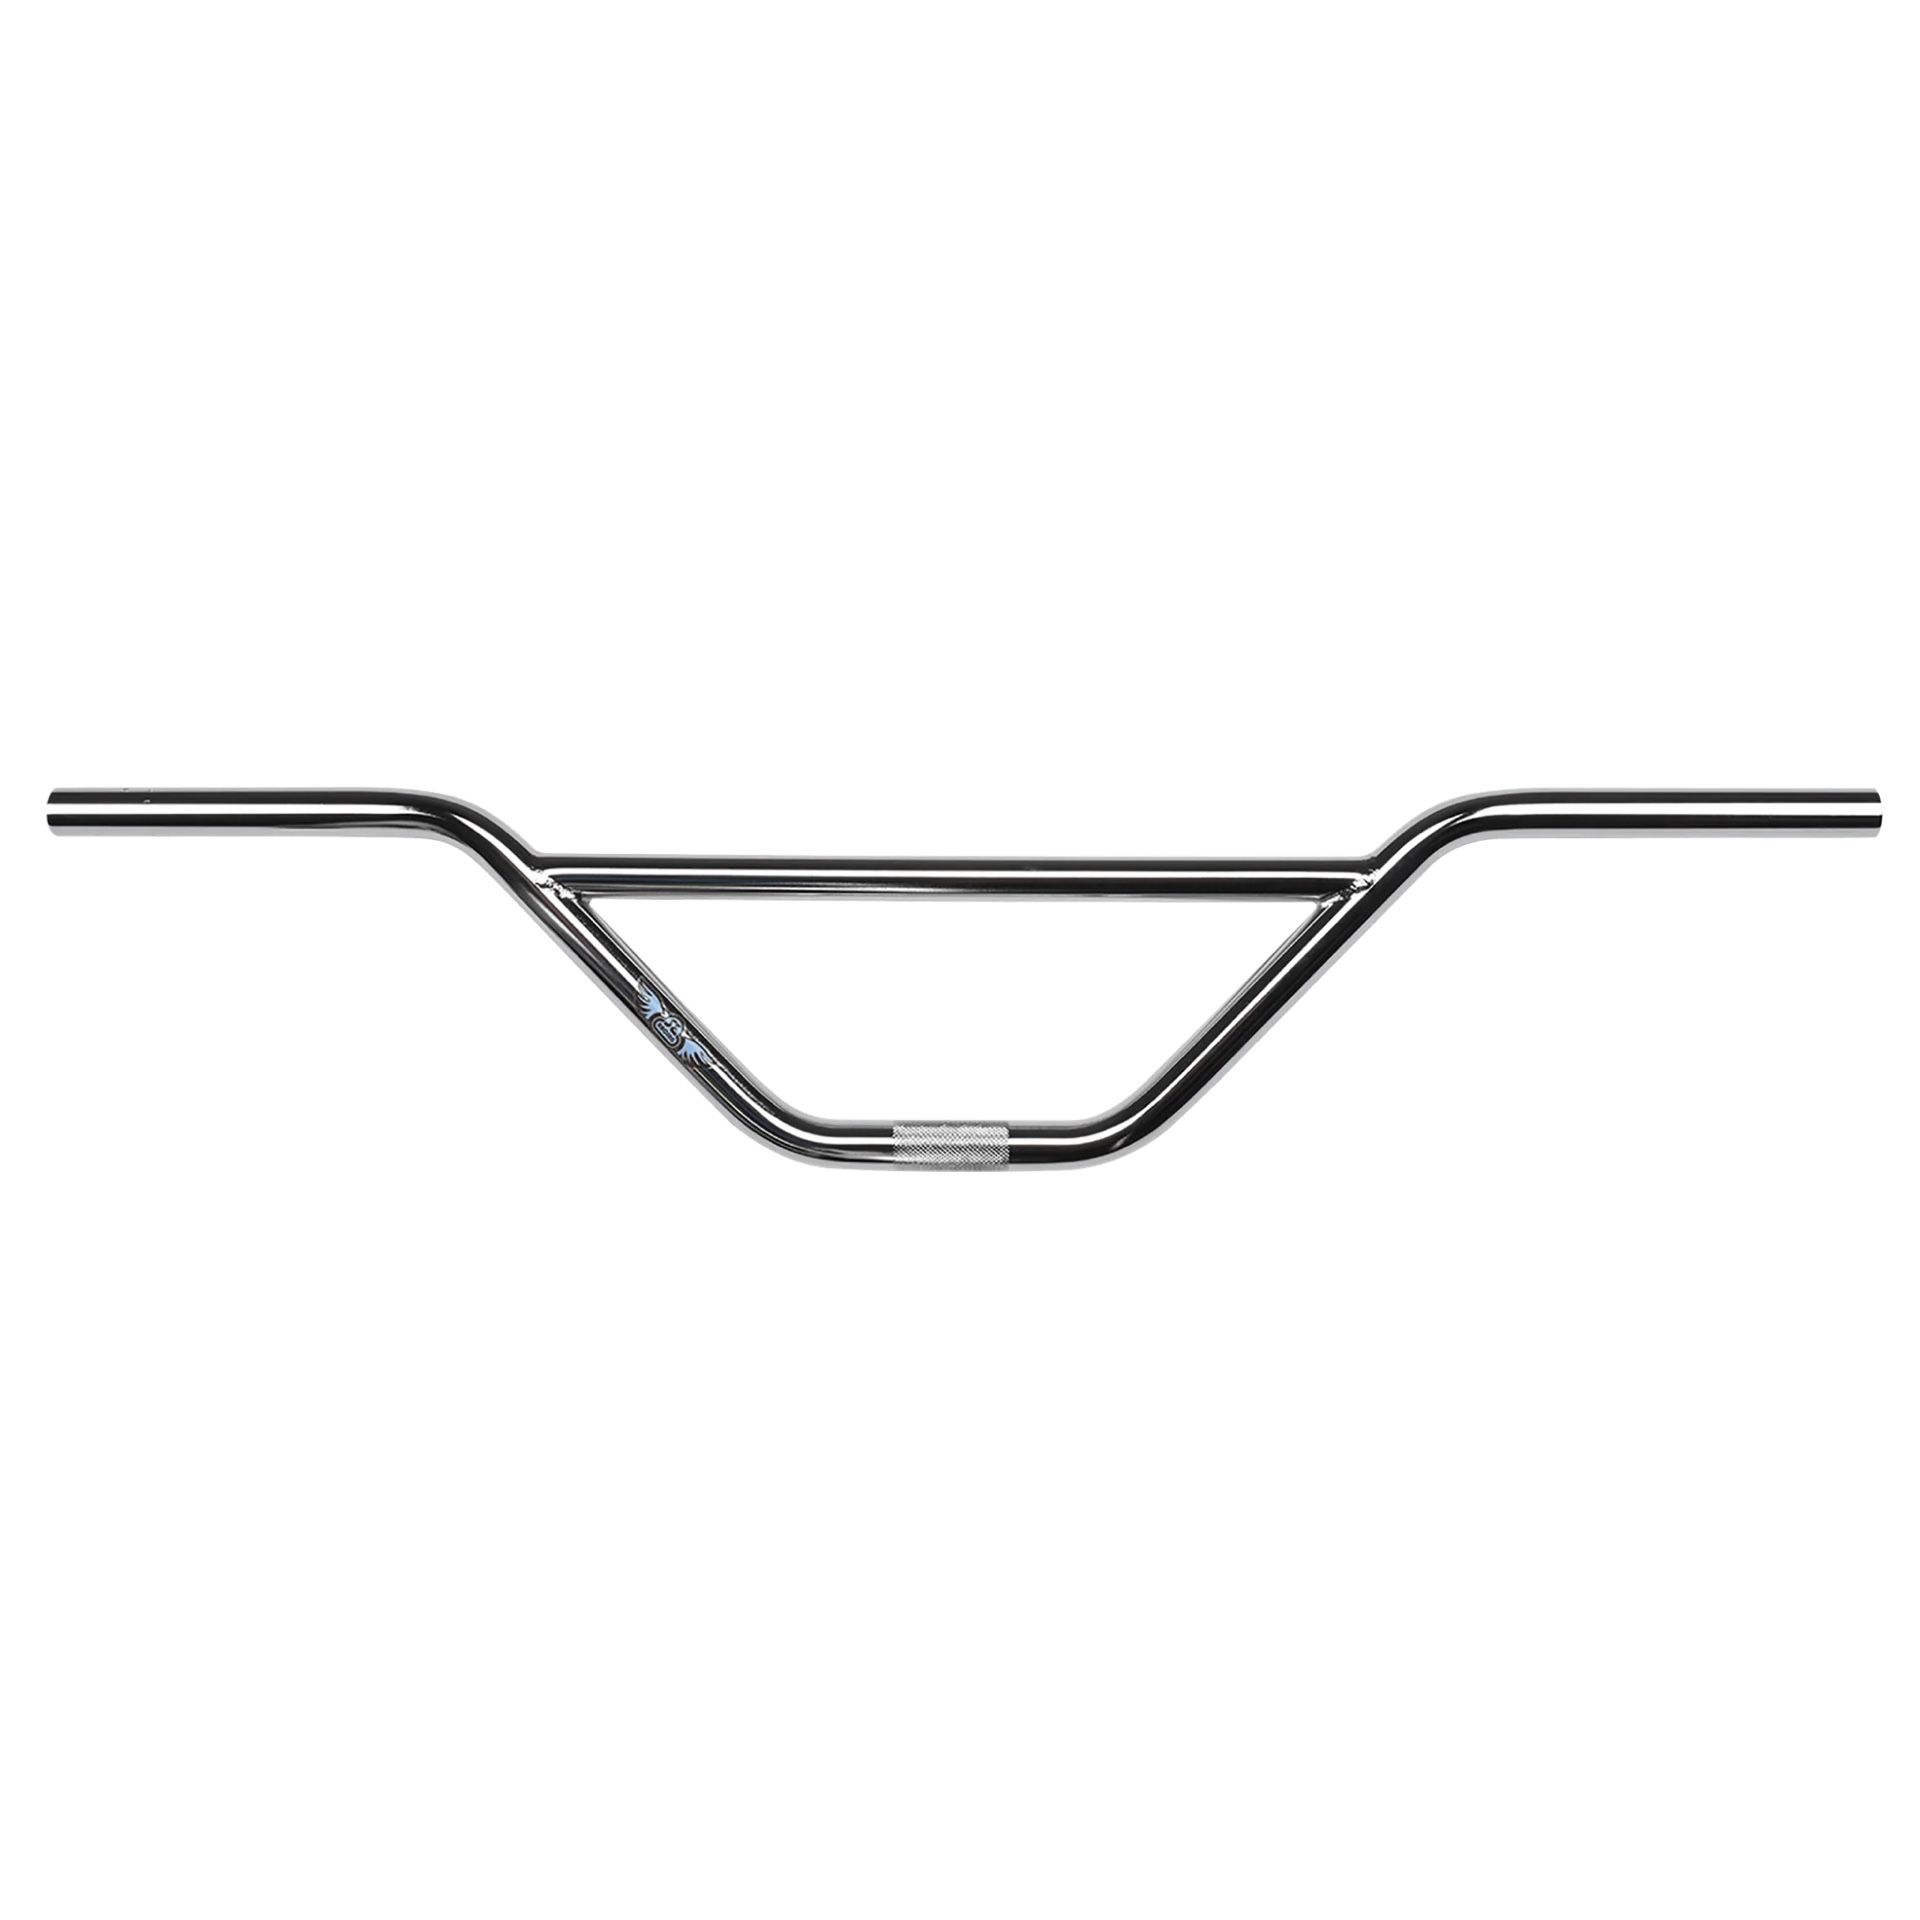 SE RACING BIG HONKIN BARS CHROME $52 Pick Up Only Brand New In Box